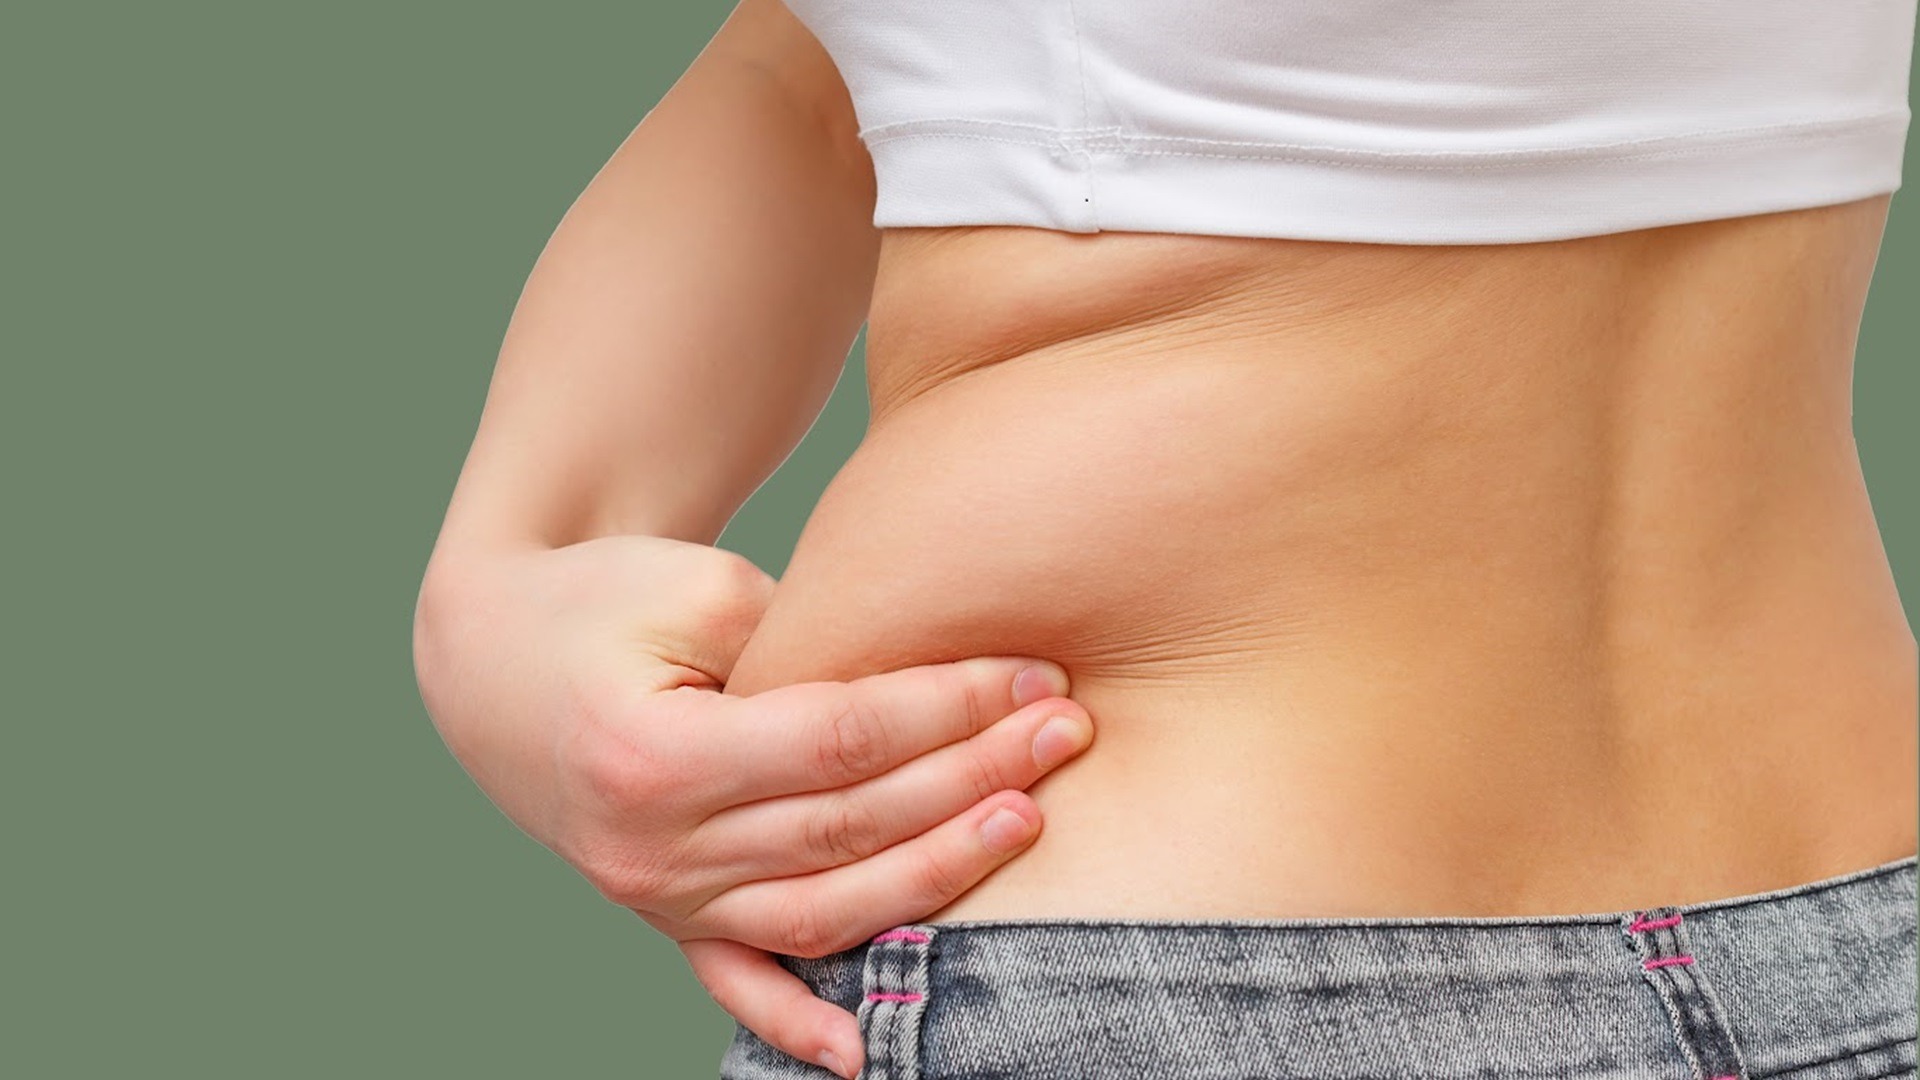 In which areas of the body can liposuction be performed? 